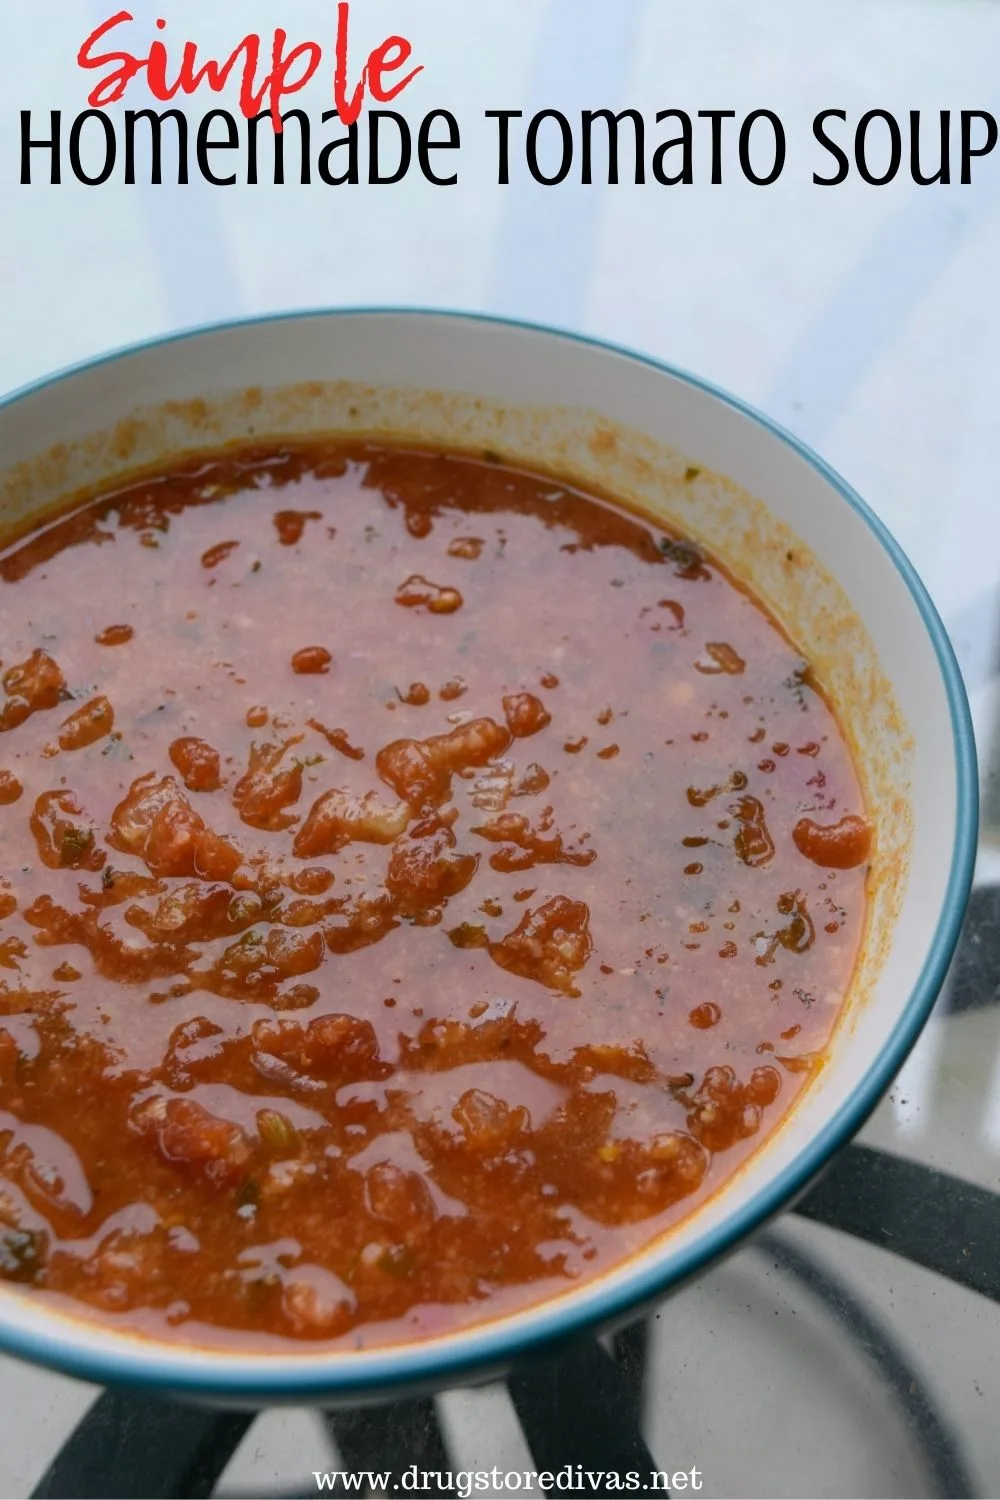 Homemade Simple Tomato Soup is the perfect soup for a cold day. And it's completely made from pantry ingredients.